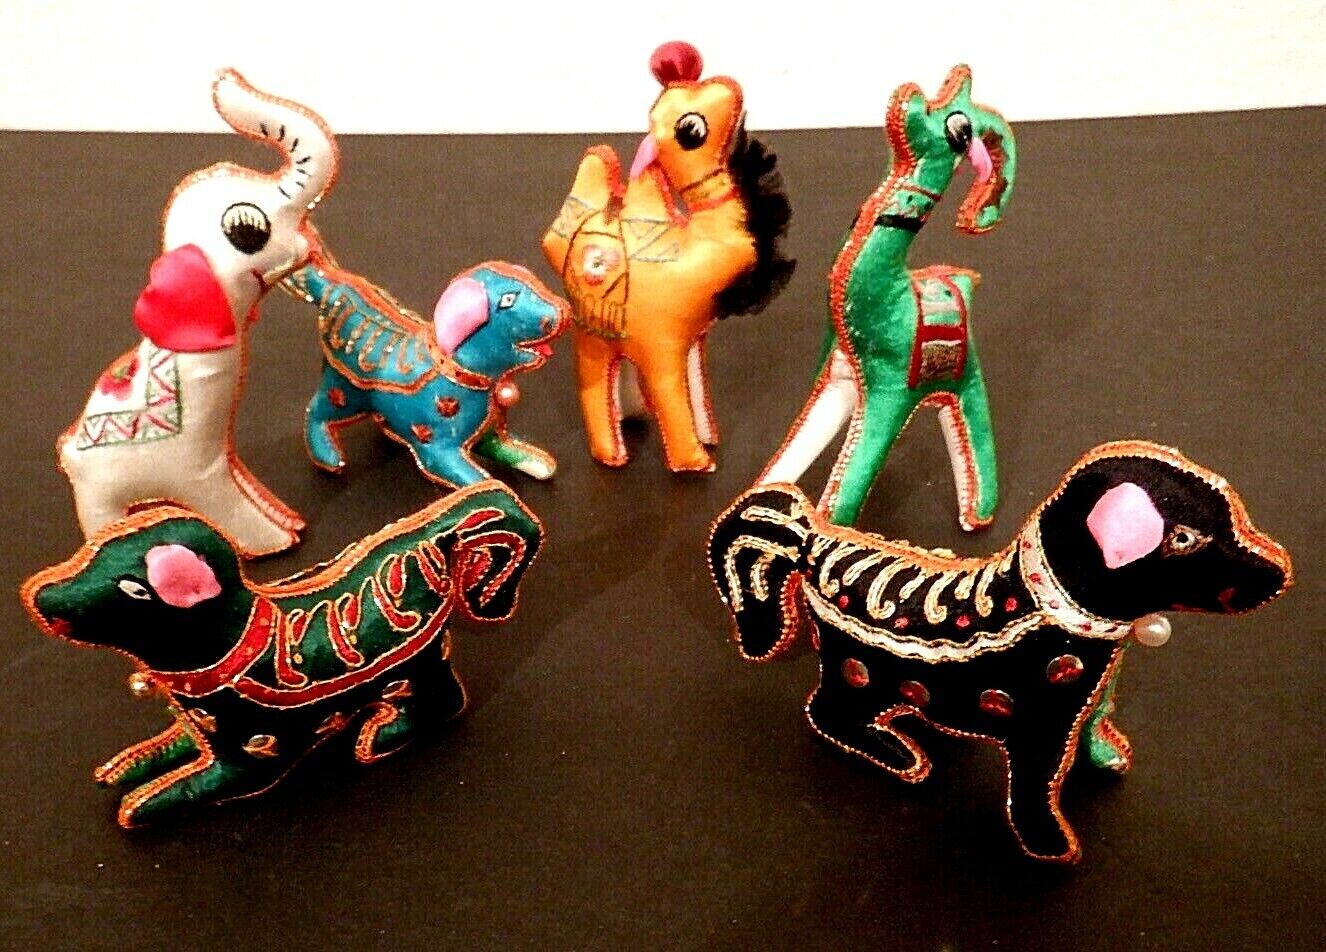 Vintage Chinese Silk and Embroidered Animal Figures 6 pieces Без бренда - фотография #3